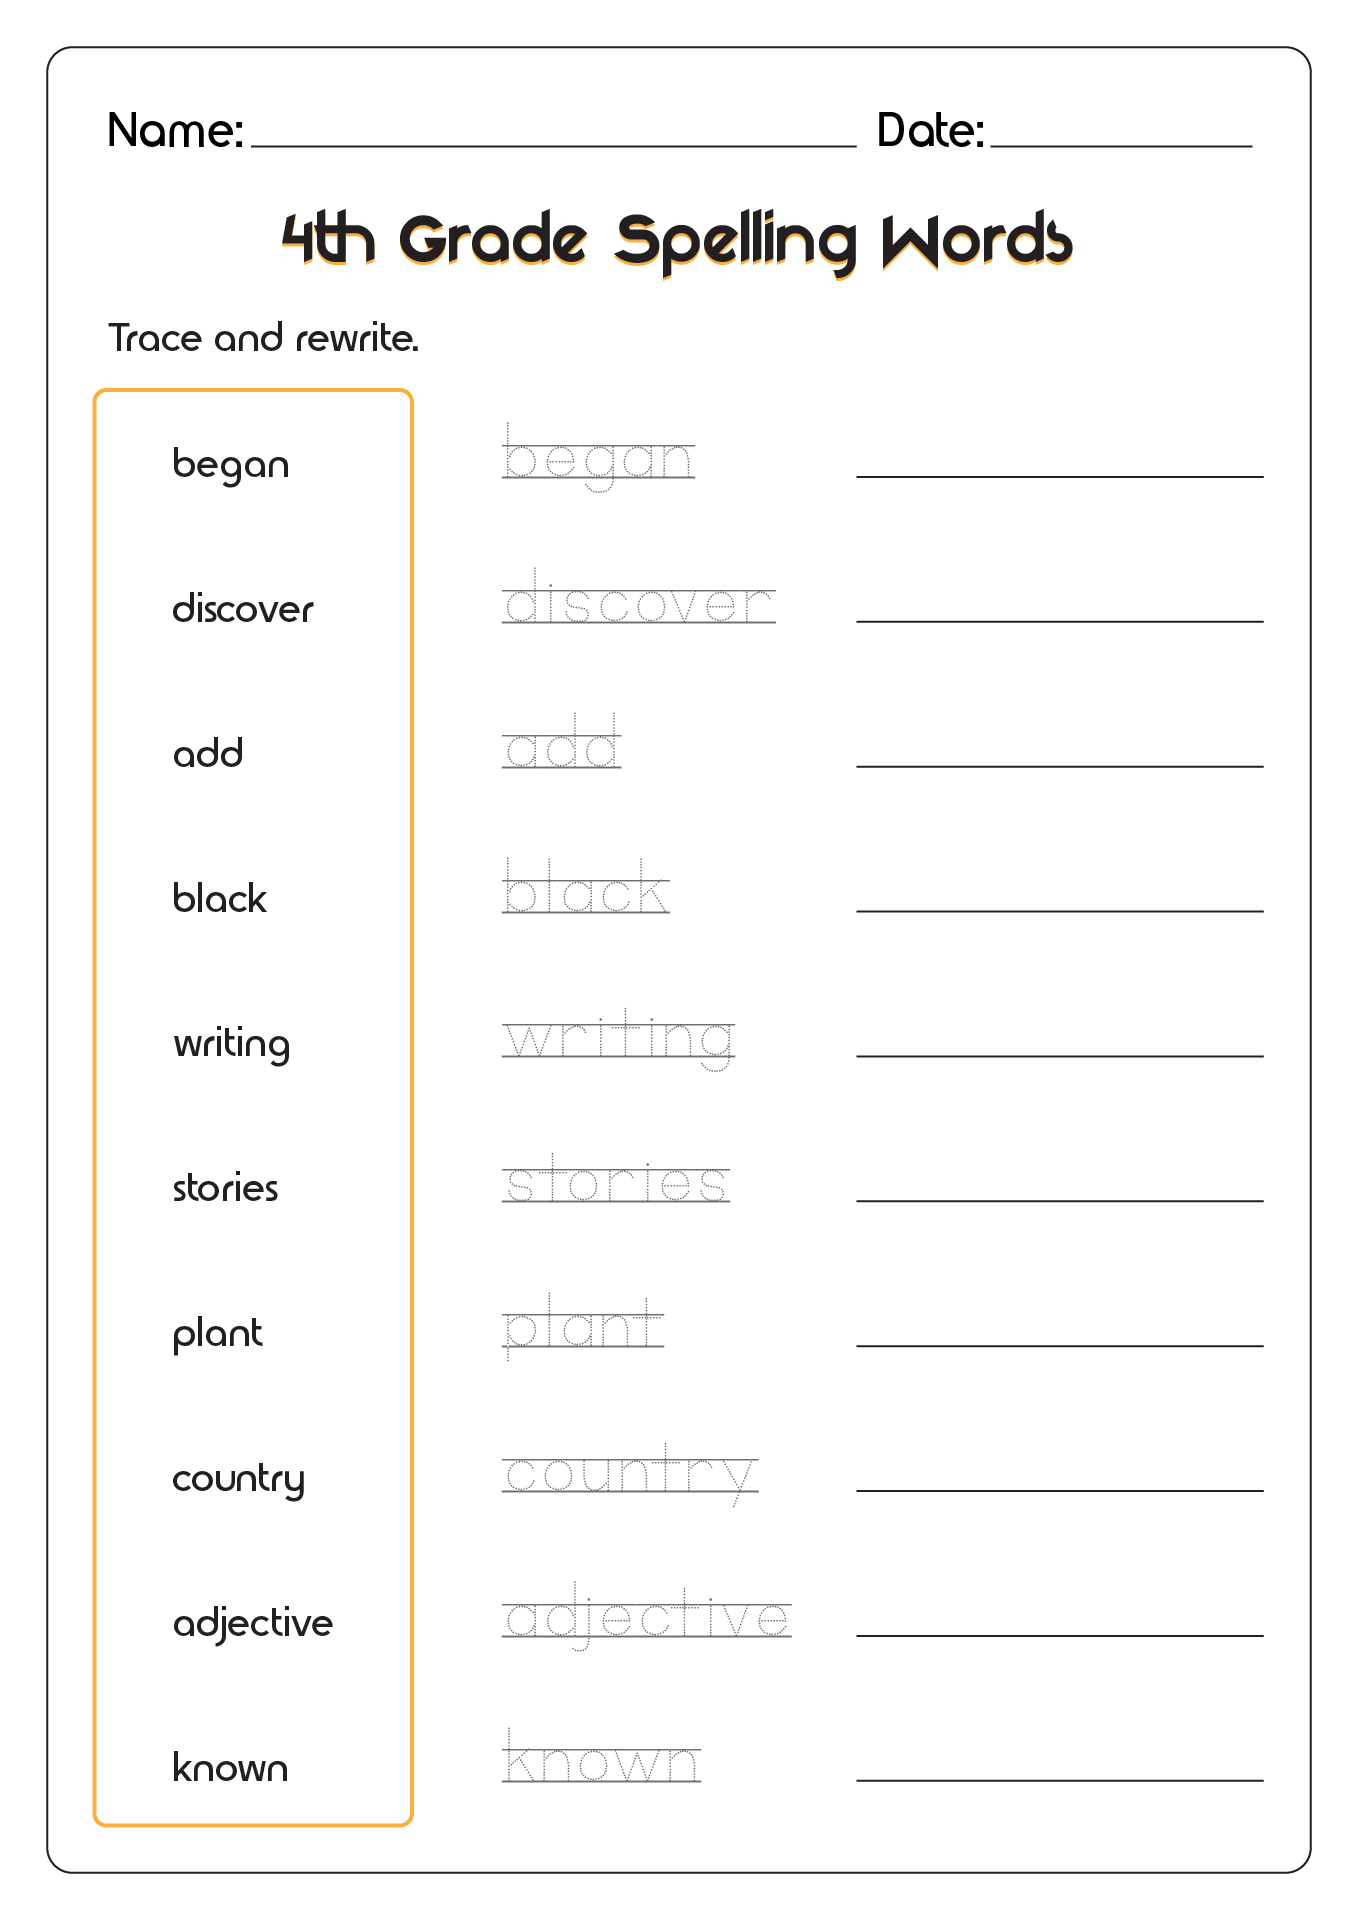 Free Printable Worksheets For 4th Grade Vocabulary